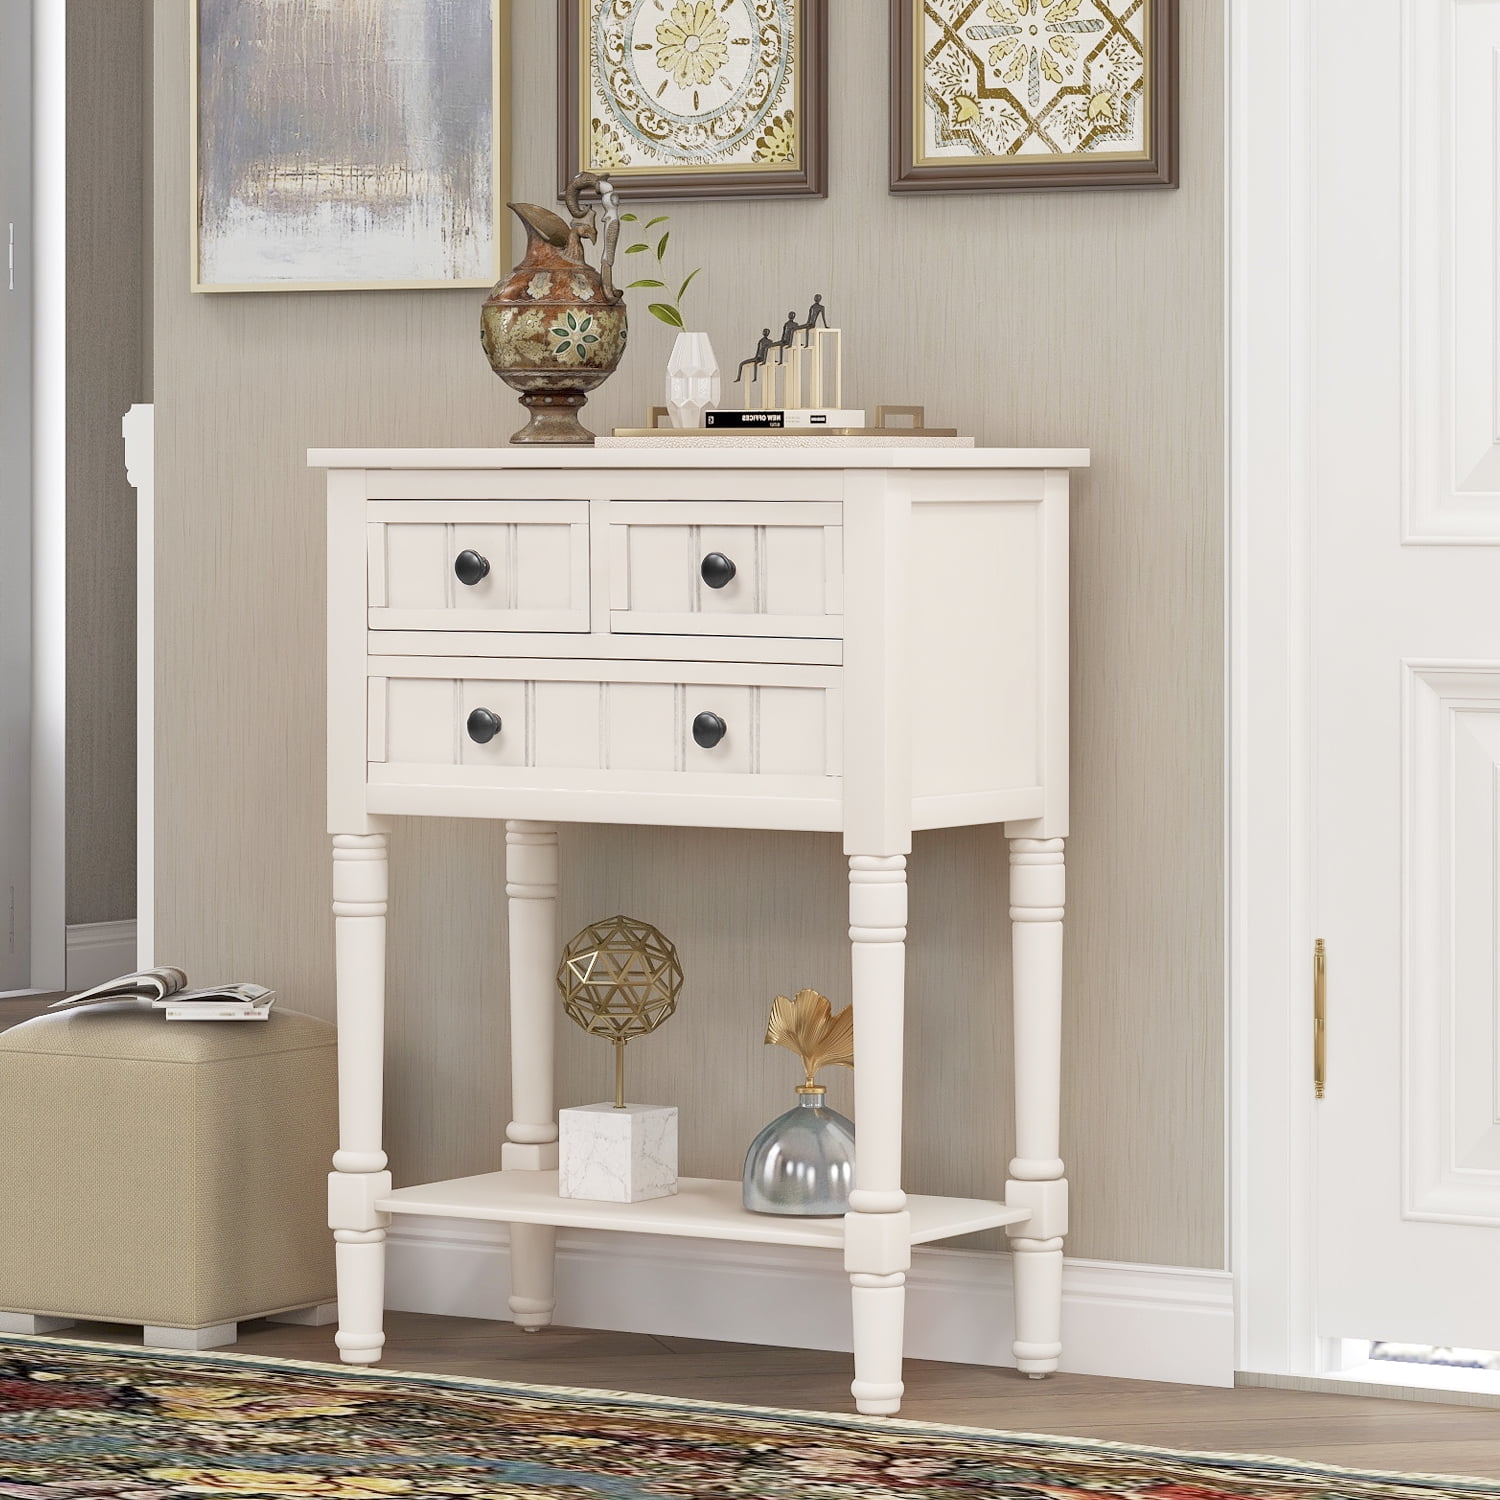 Jumper Console Table 24 Solid Wood, White Wood Console Table With Drawers